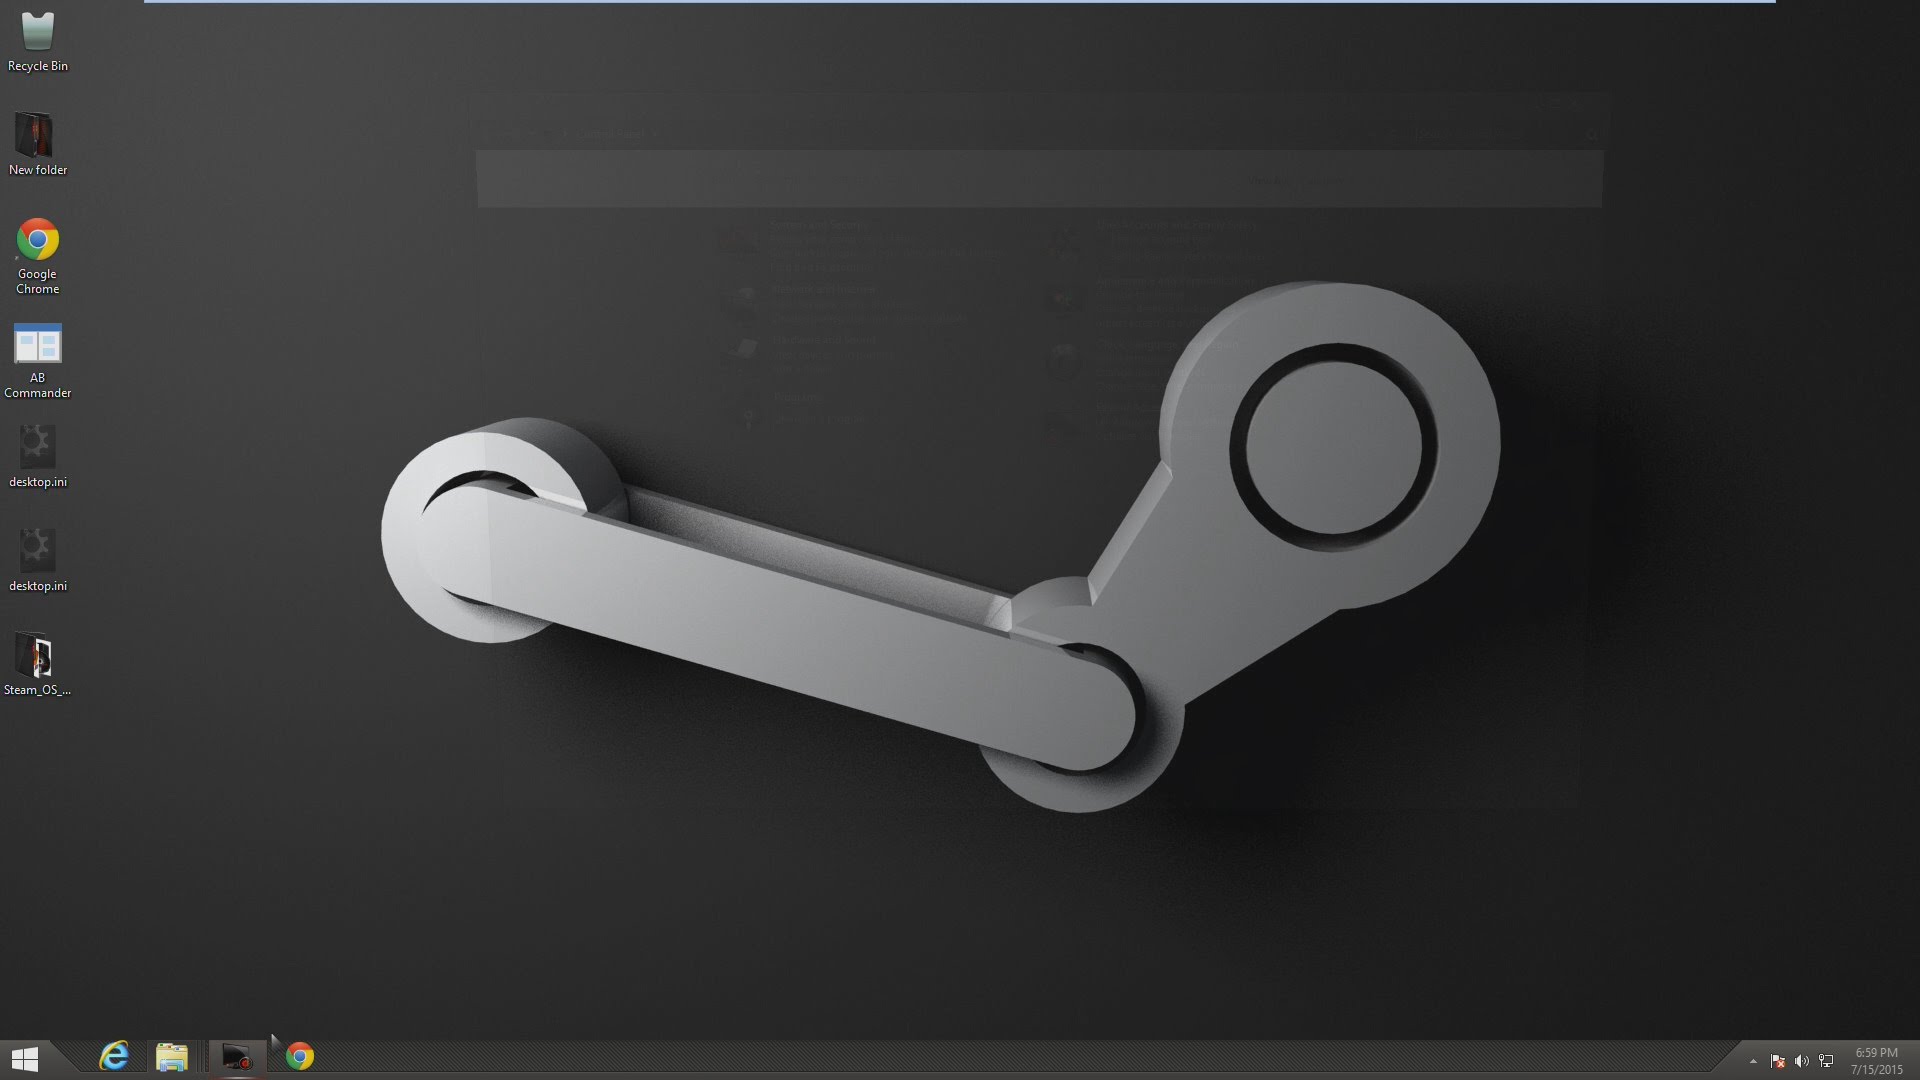 50% of PC gamers on Steam are now on Windows 10 devices